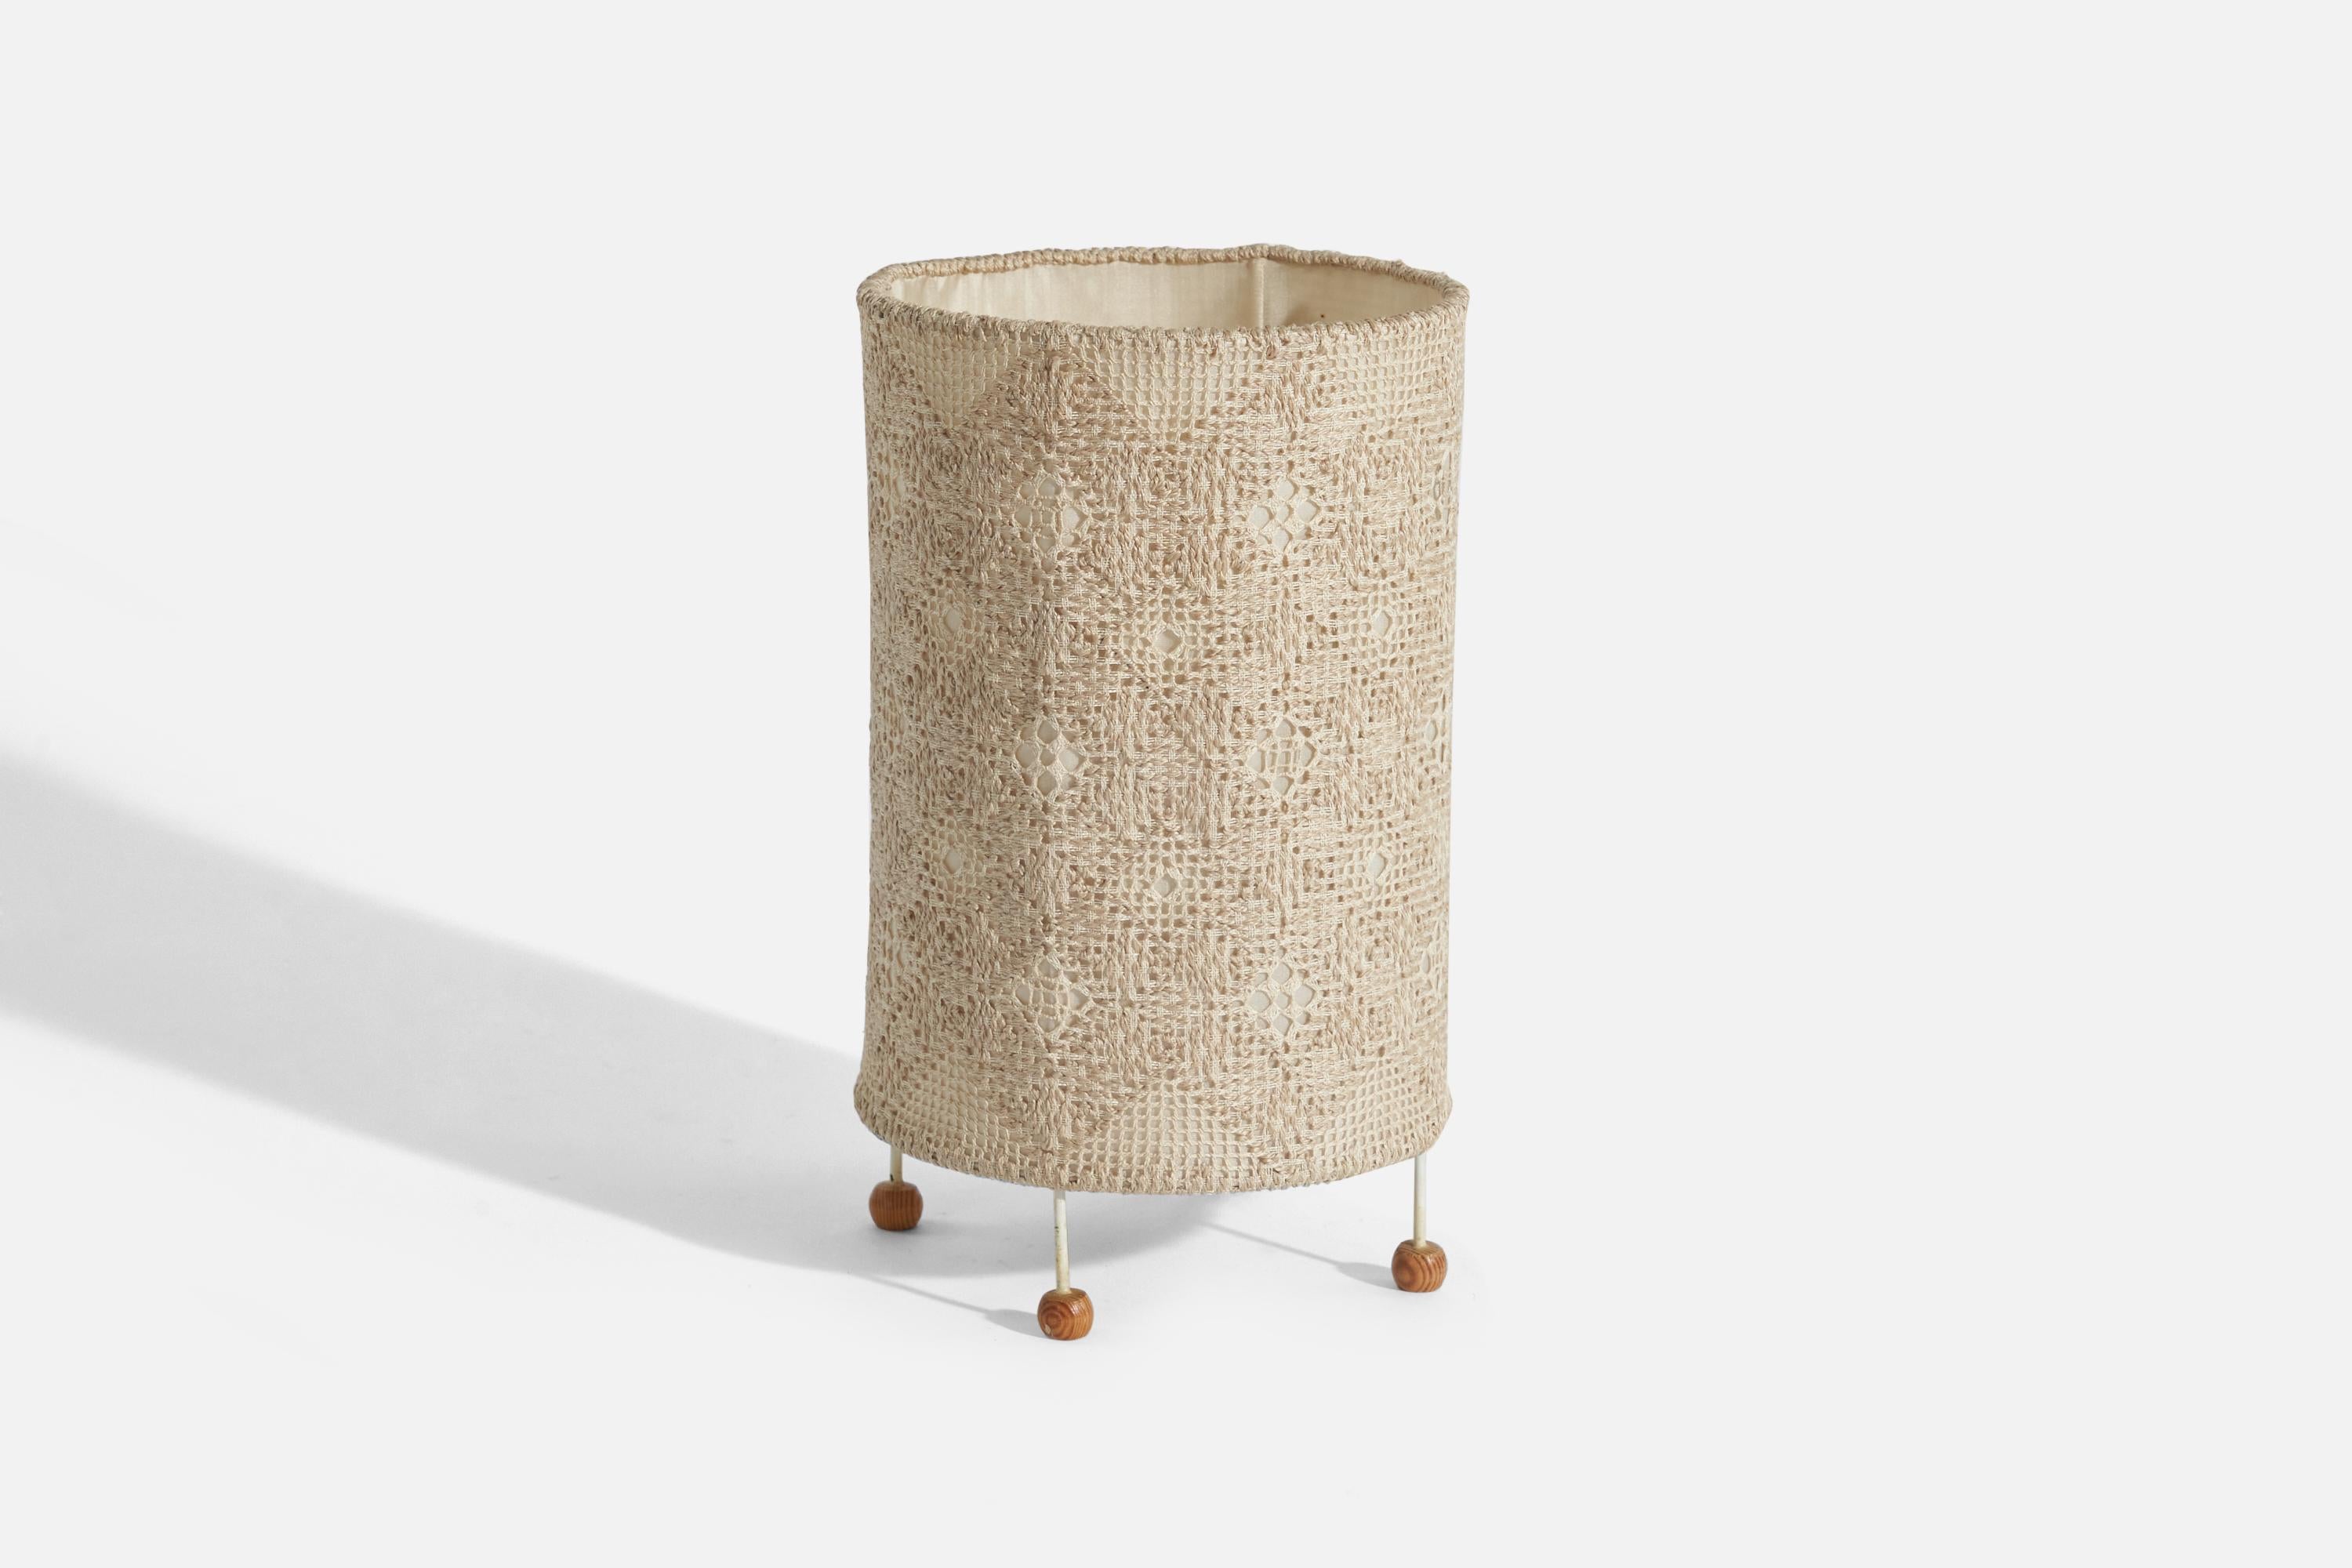 A white-lacquered metal, pine and embroidered fabric table lamp designed and produced in Sweden, c. 1950s. 

Socket takes standard E-26 medium base bulb.
There is no maximum wattage stated on the fixture.